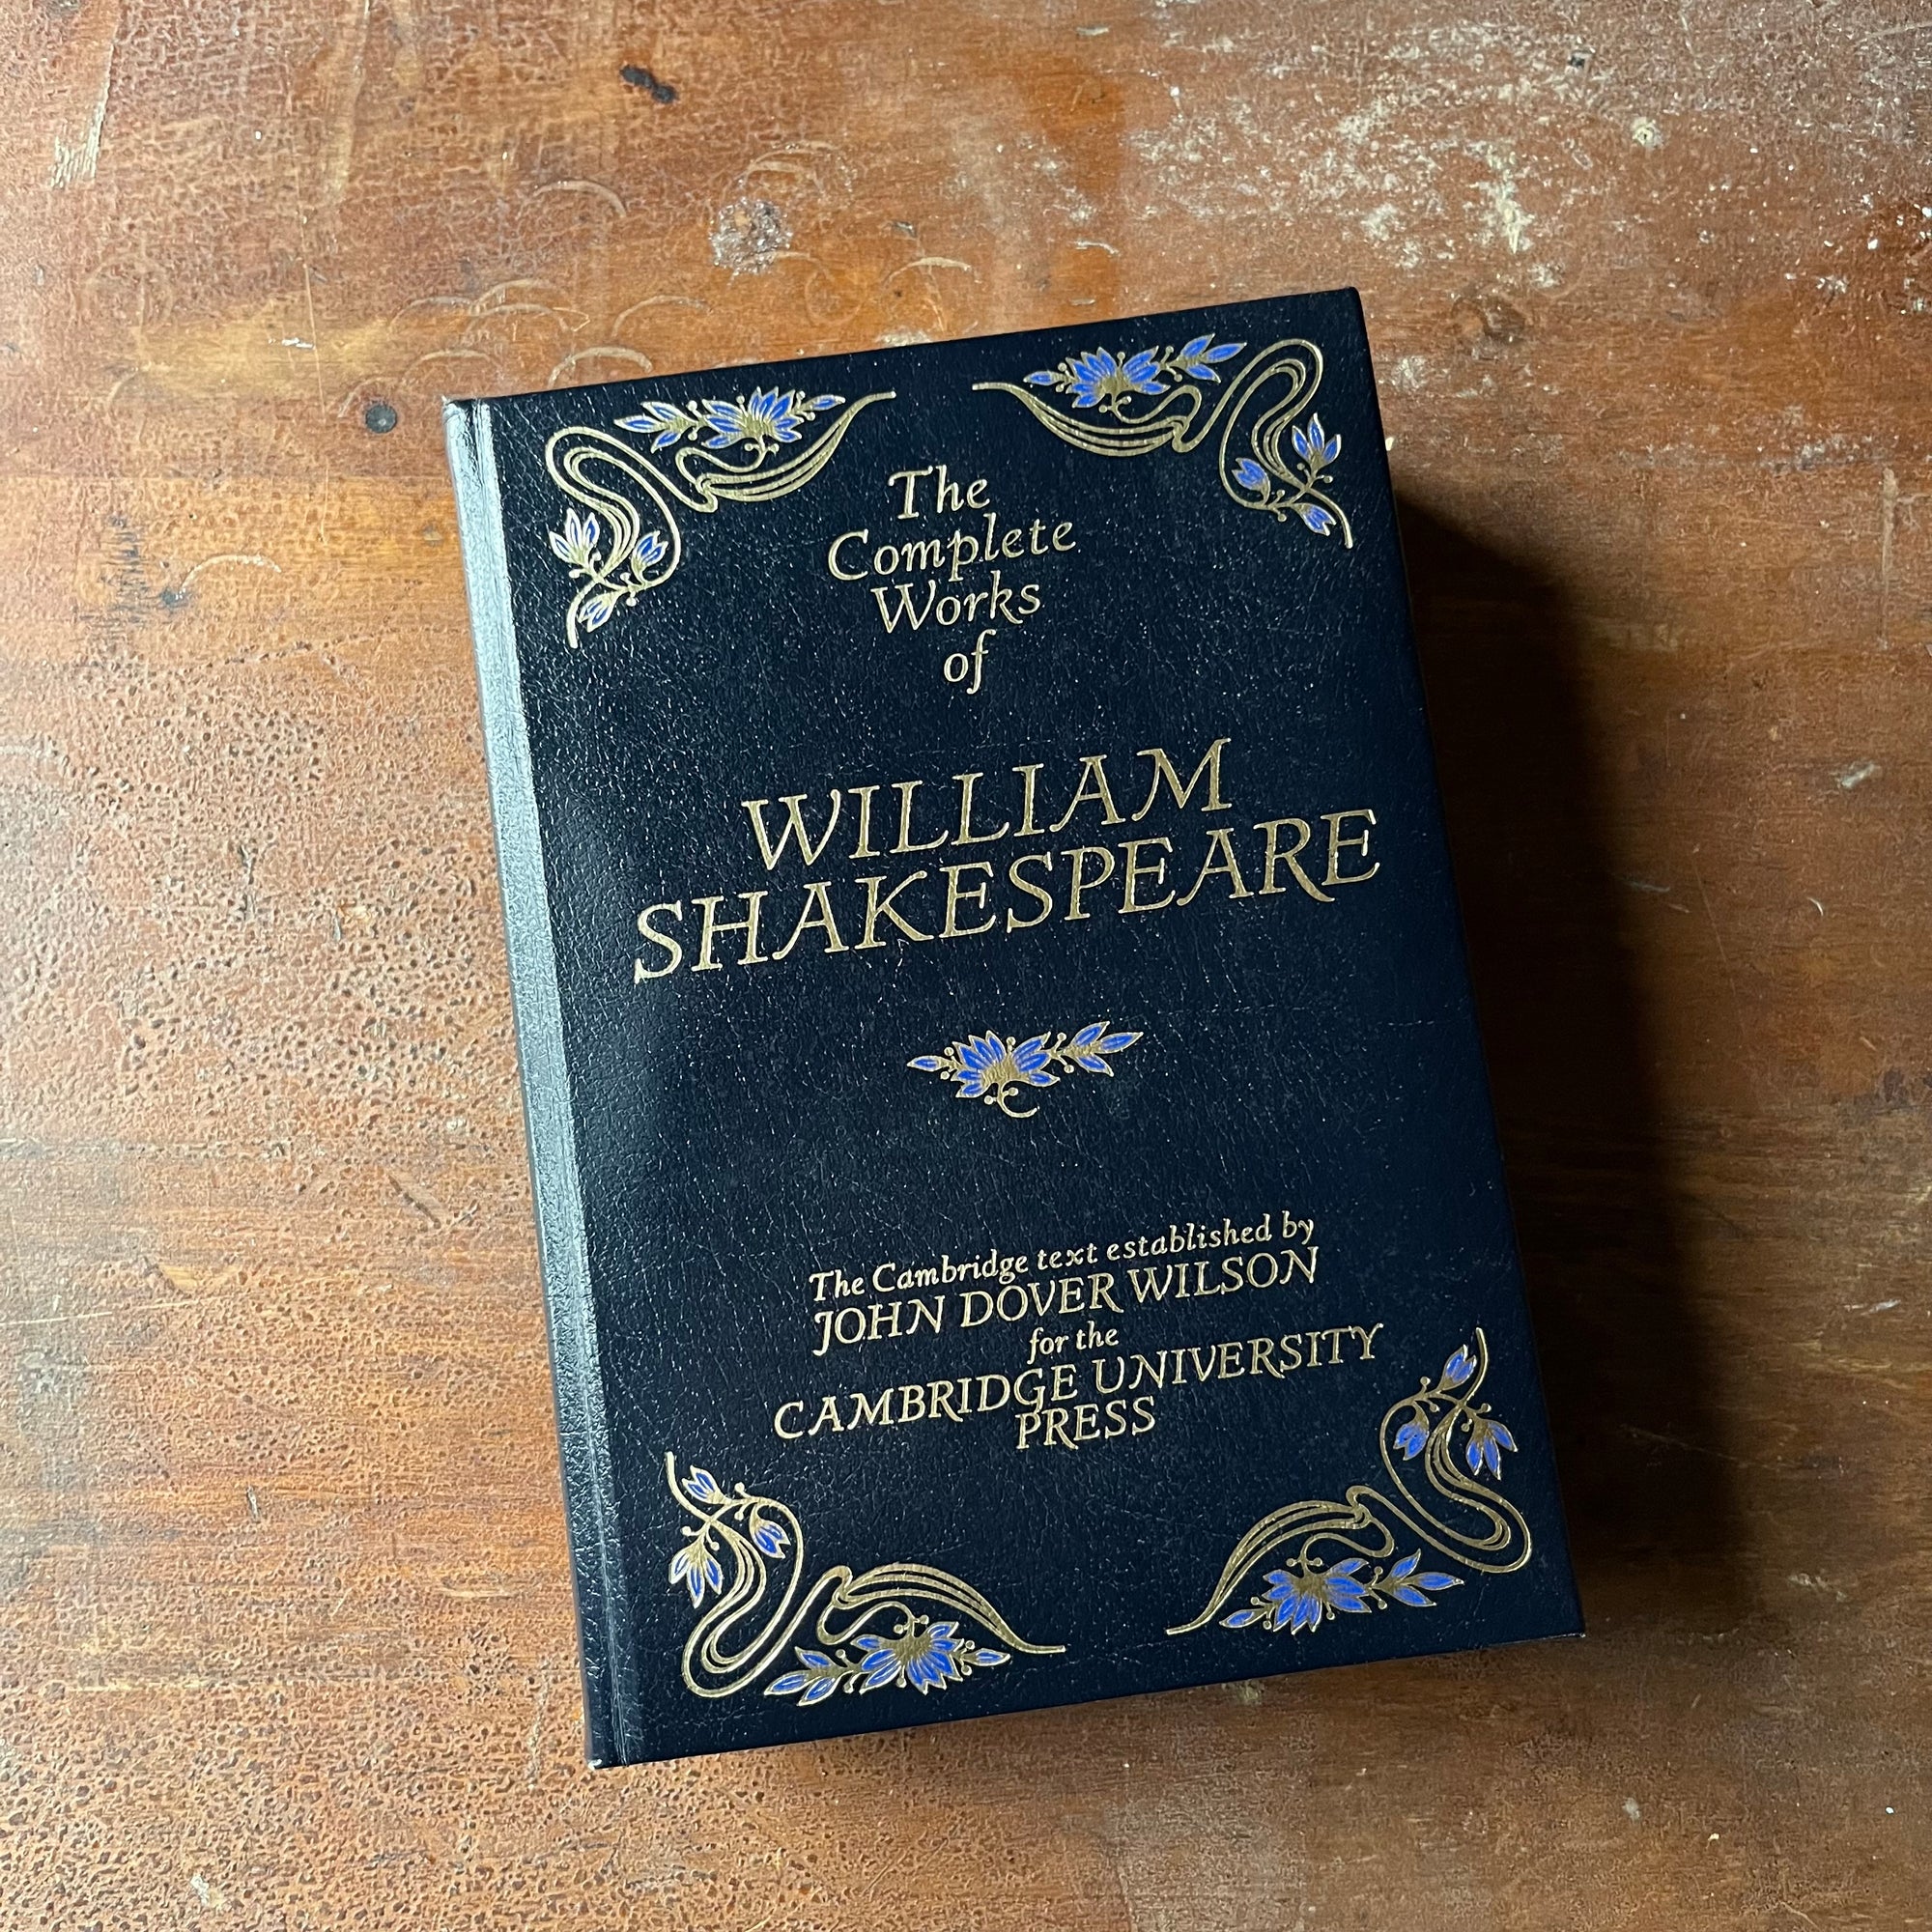 The Complete Works of William Shakespeare-Cambridge University Press-1982 Edition - view of the front cover in blue with a floral design at each corner with the title written in the middle